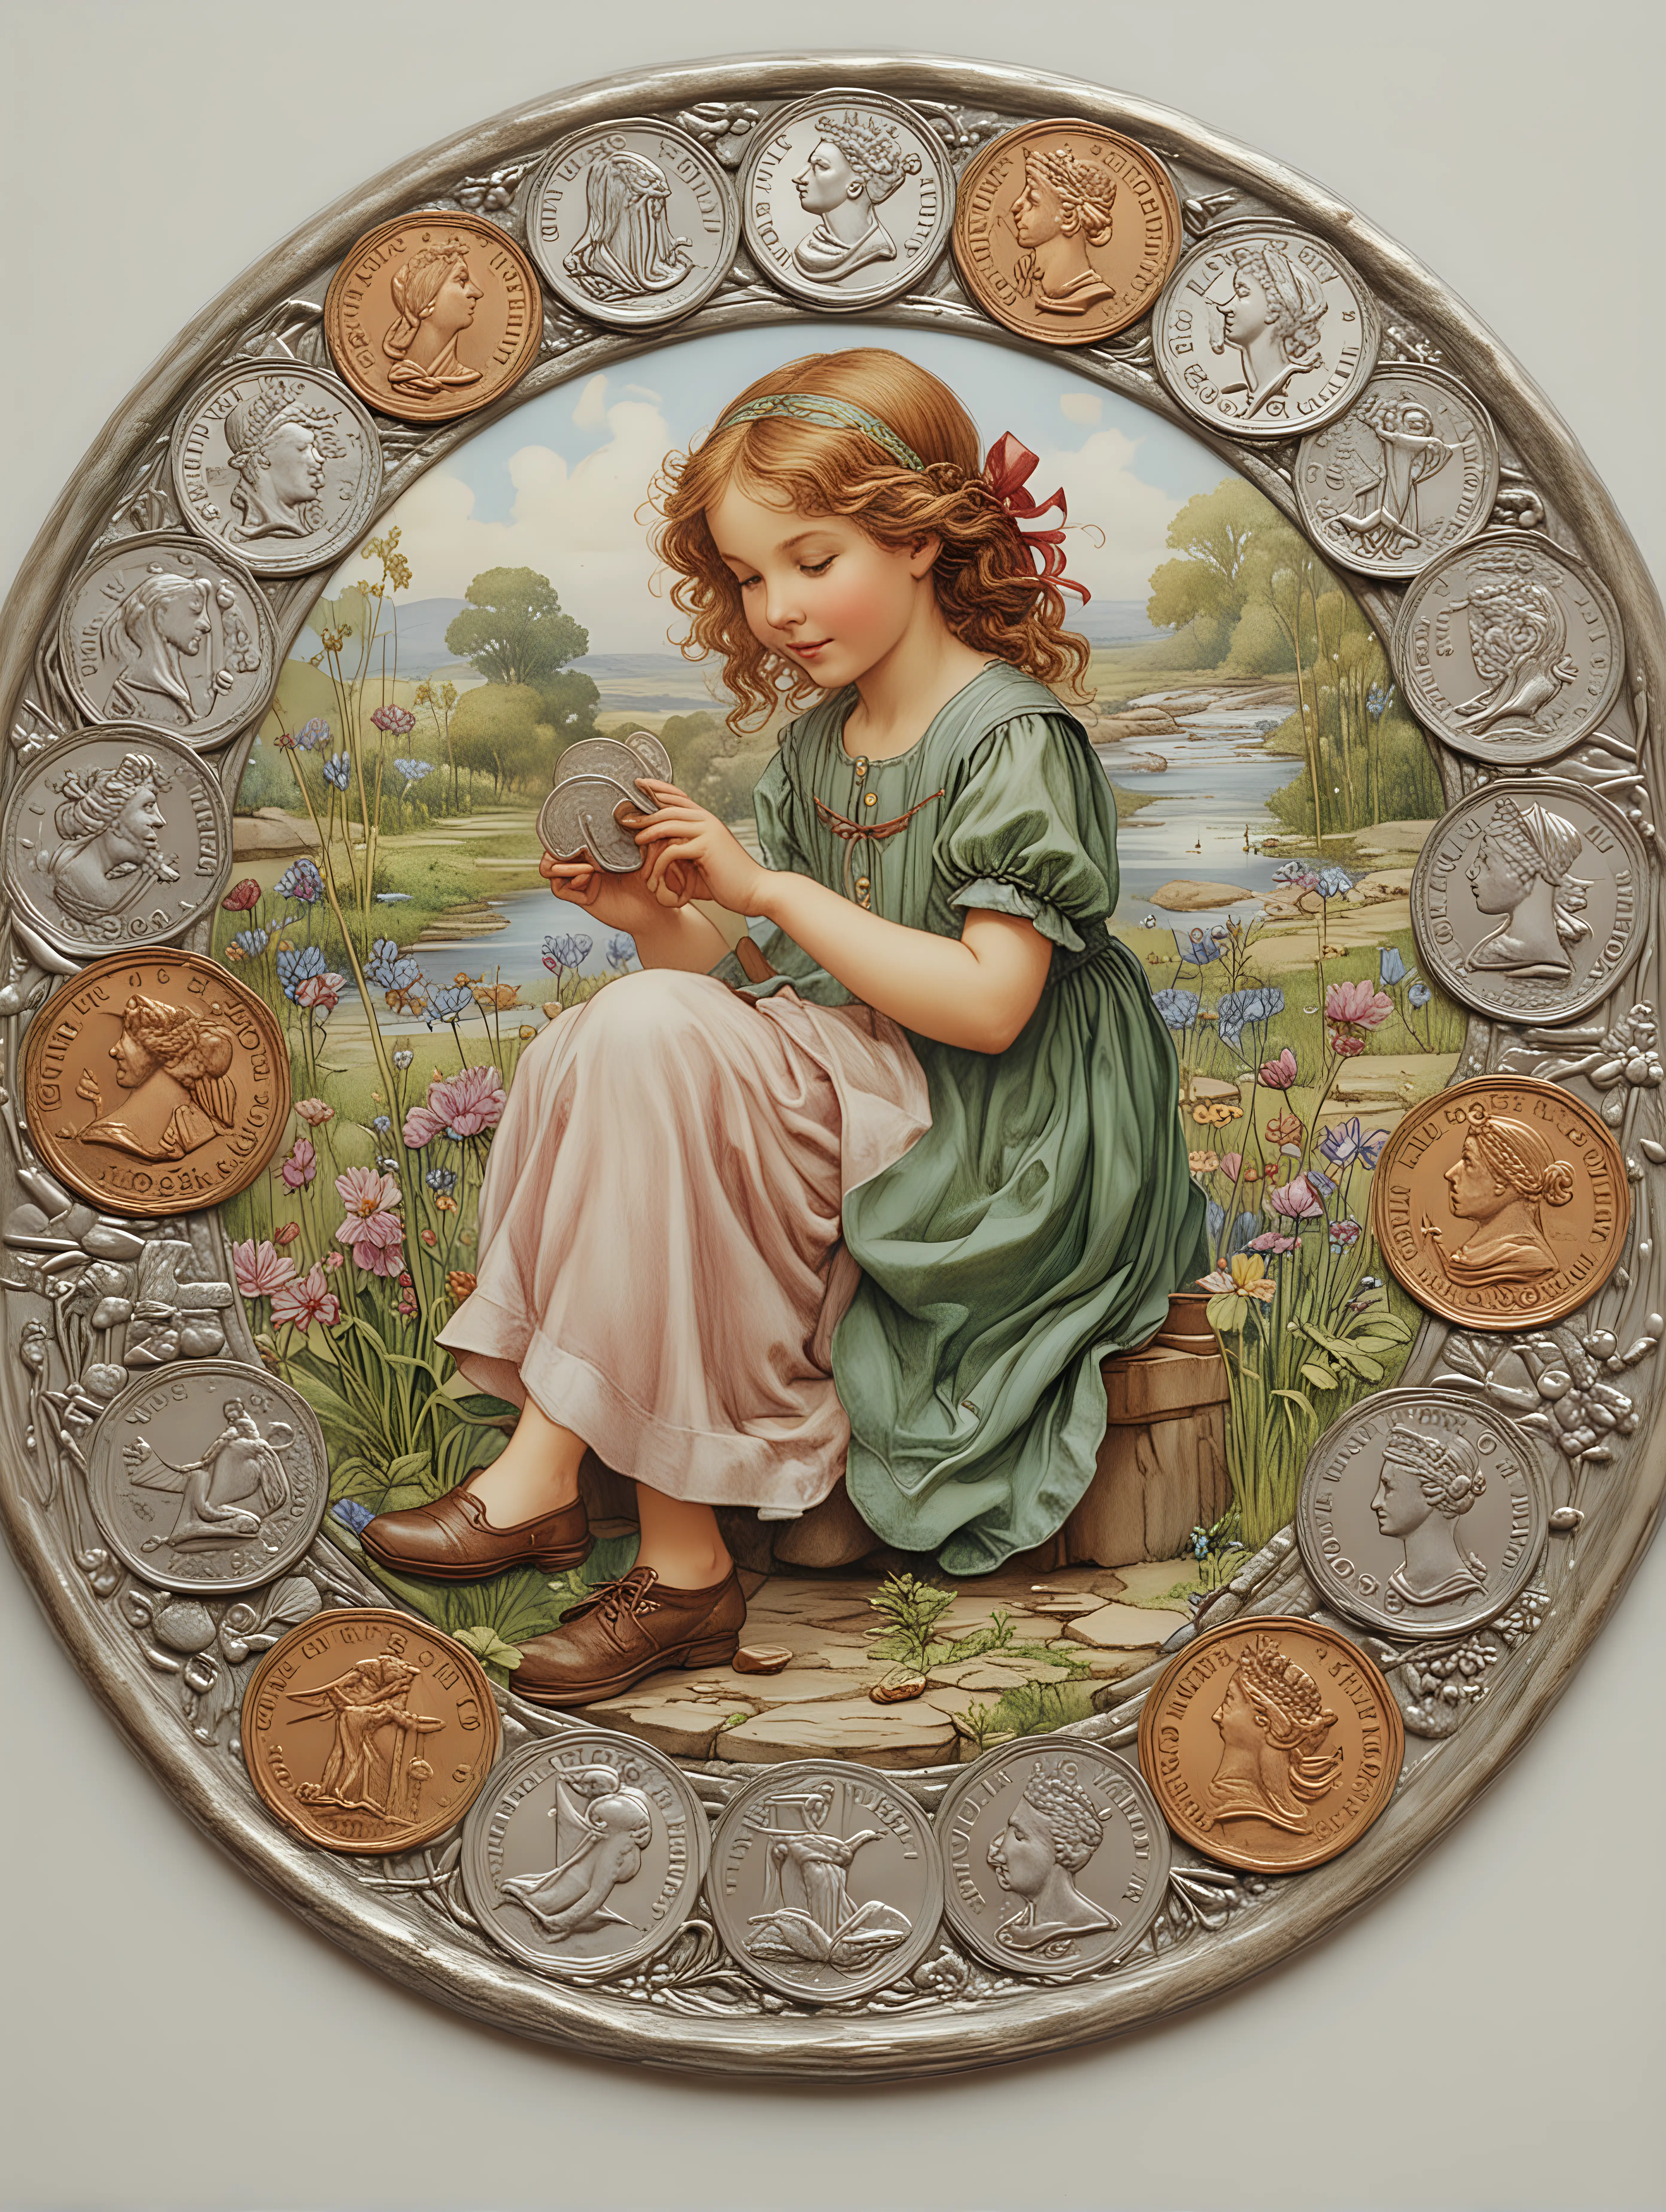 Cicely Mary Barker illustration.
coin collection.

Cicely Mary Barker